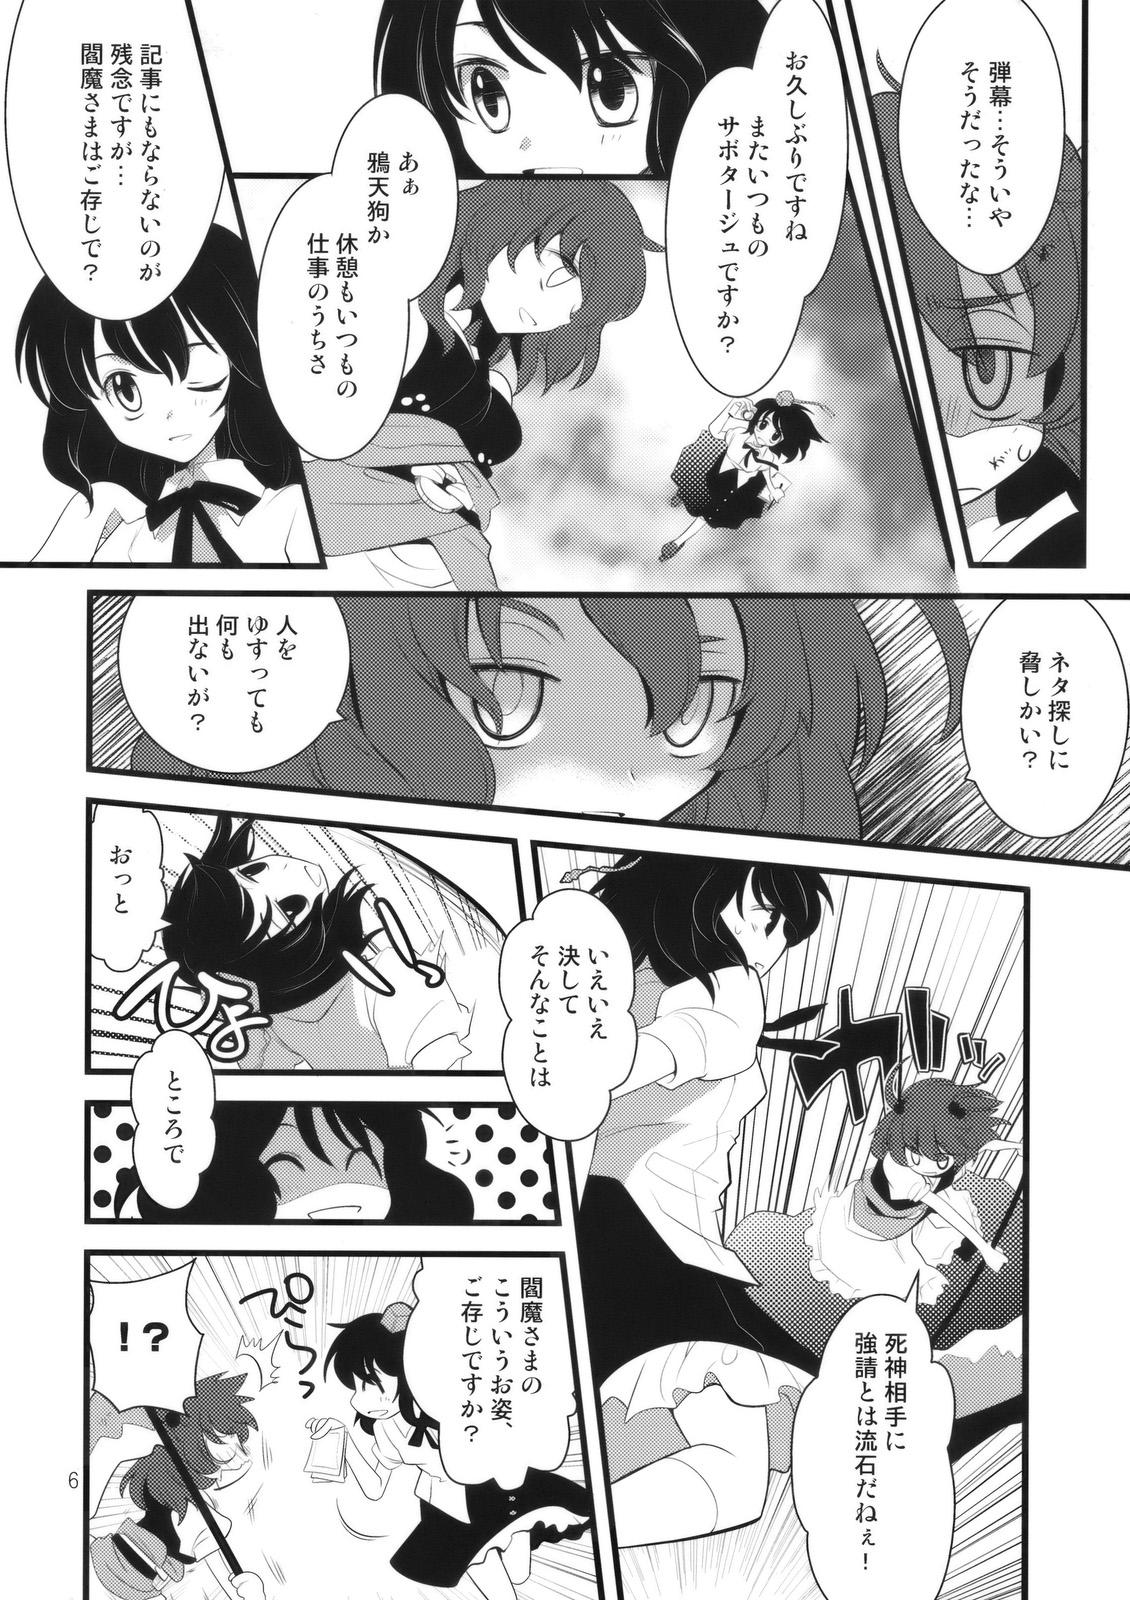 Pinoy Zecchou Saiban - Climax Trial - Touhou project Step Brother - Page 6